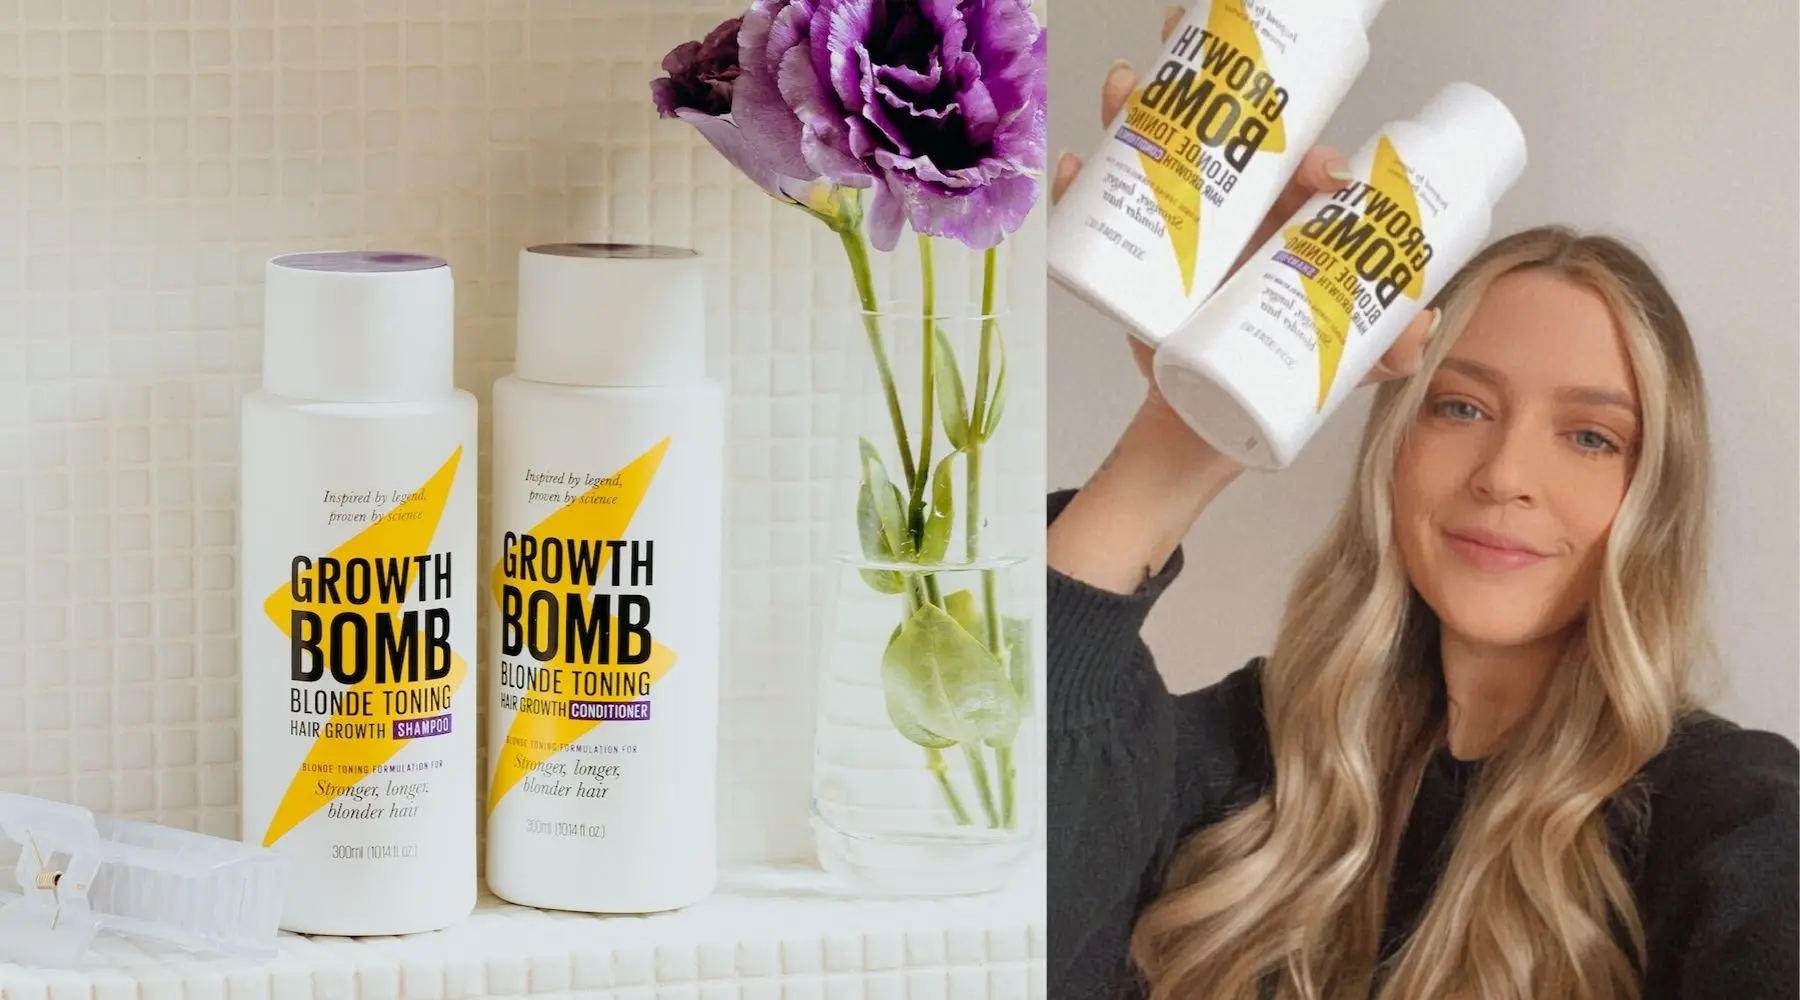 Growth Bomb Blonde Toning Hair Growth review | Finder